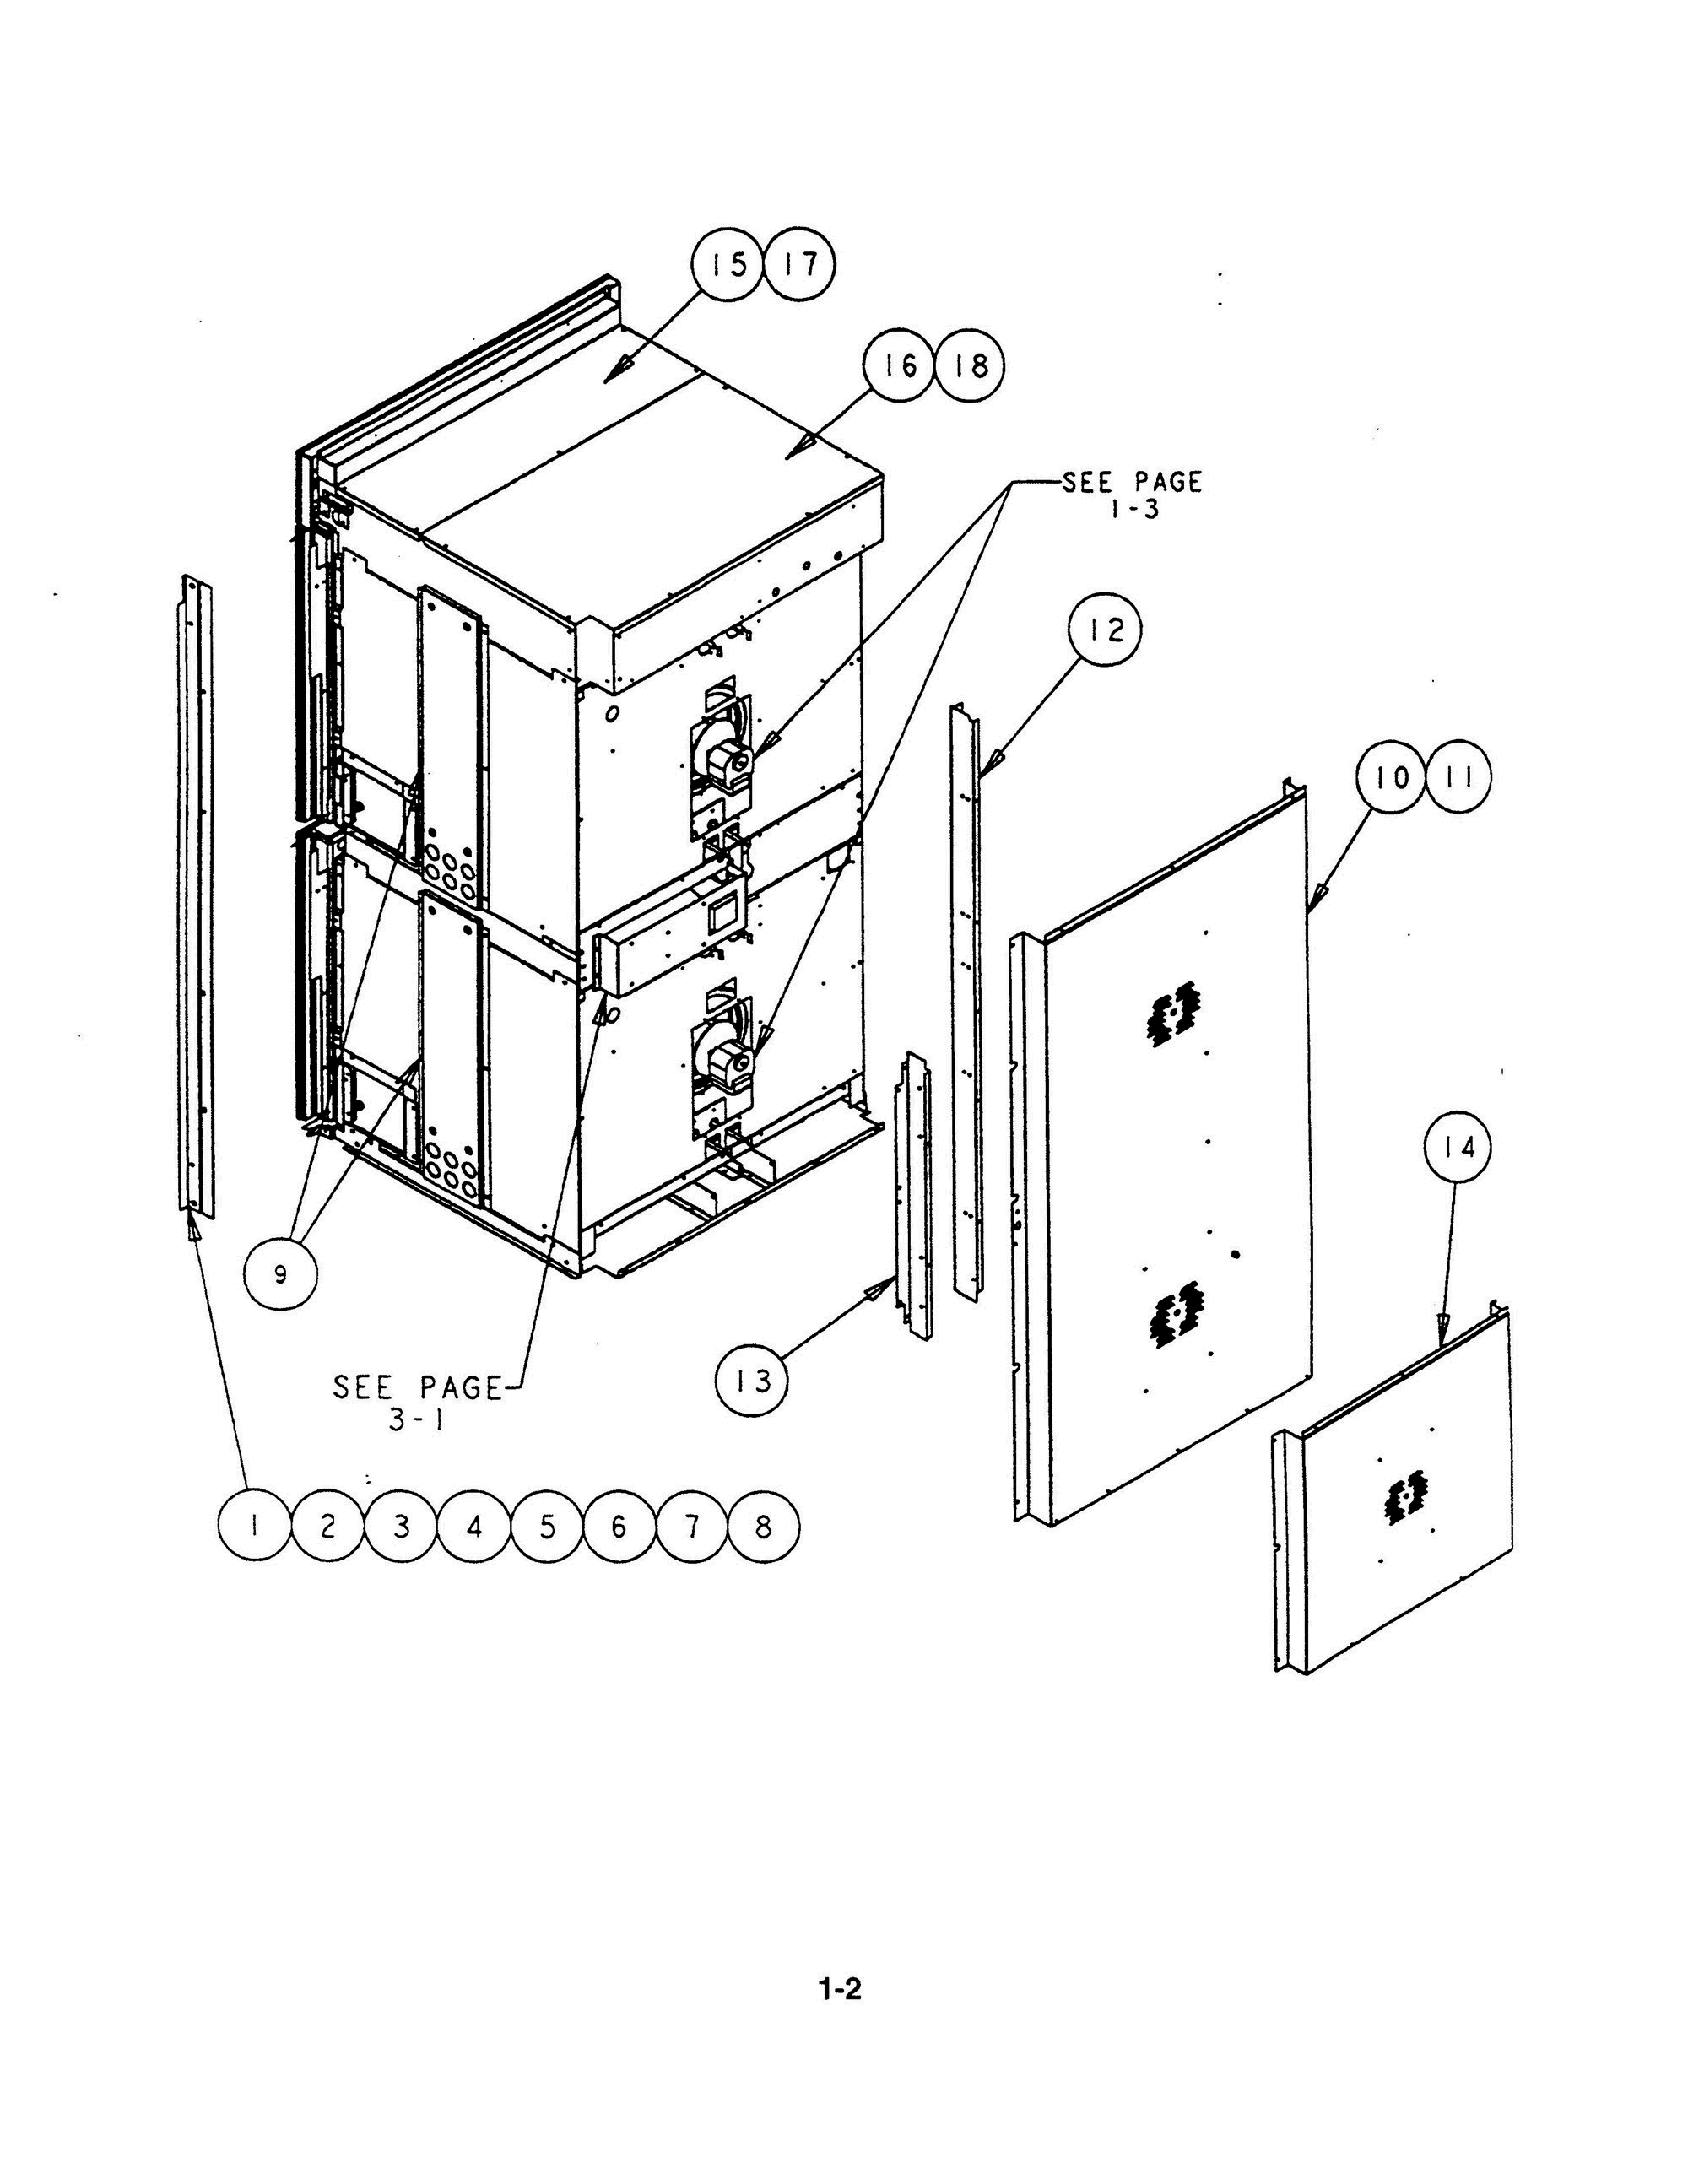 Part Location Diagram of 00368450 Bosch DUCT